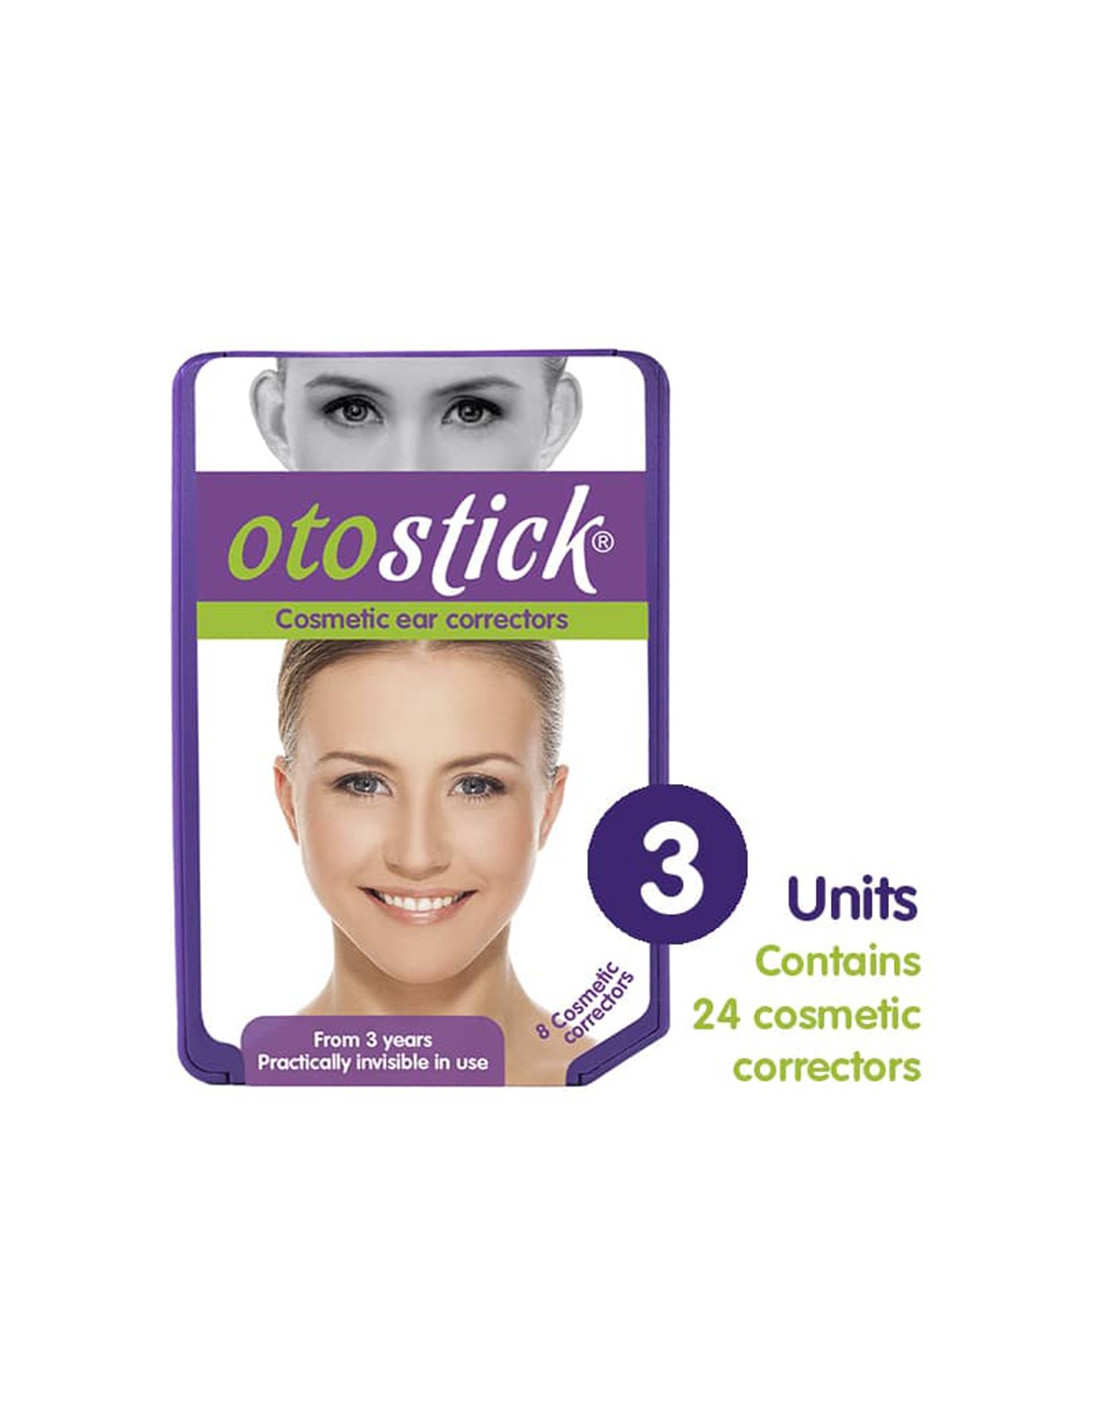 otostick - Otostick ear correctors are specially designed to be